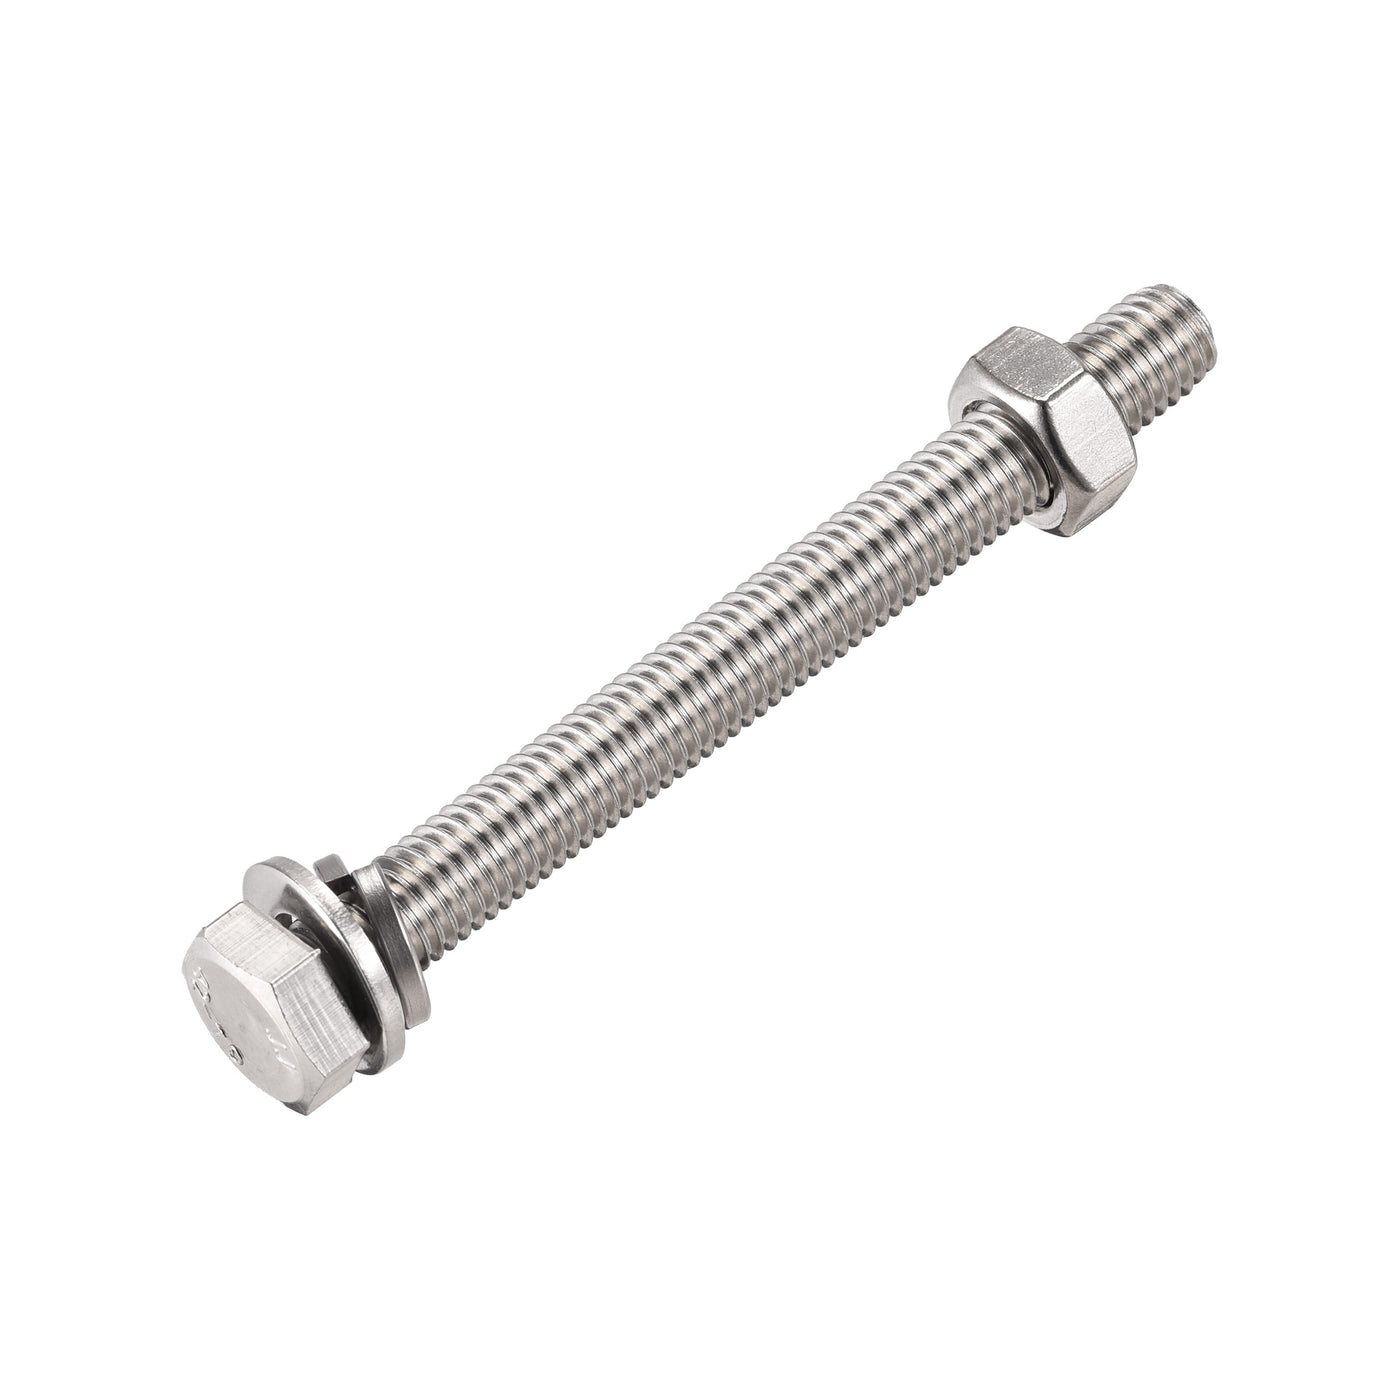 uxcell Uxcell Hex Head Screw Bolts, Nuts, Flat & Lock Washers Kits, 304 Stainless Steel Fully Thread Hexagon Bolts 4 Sets